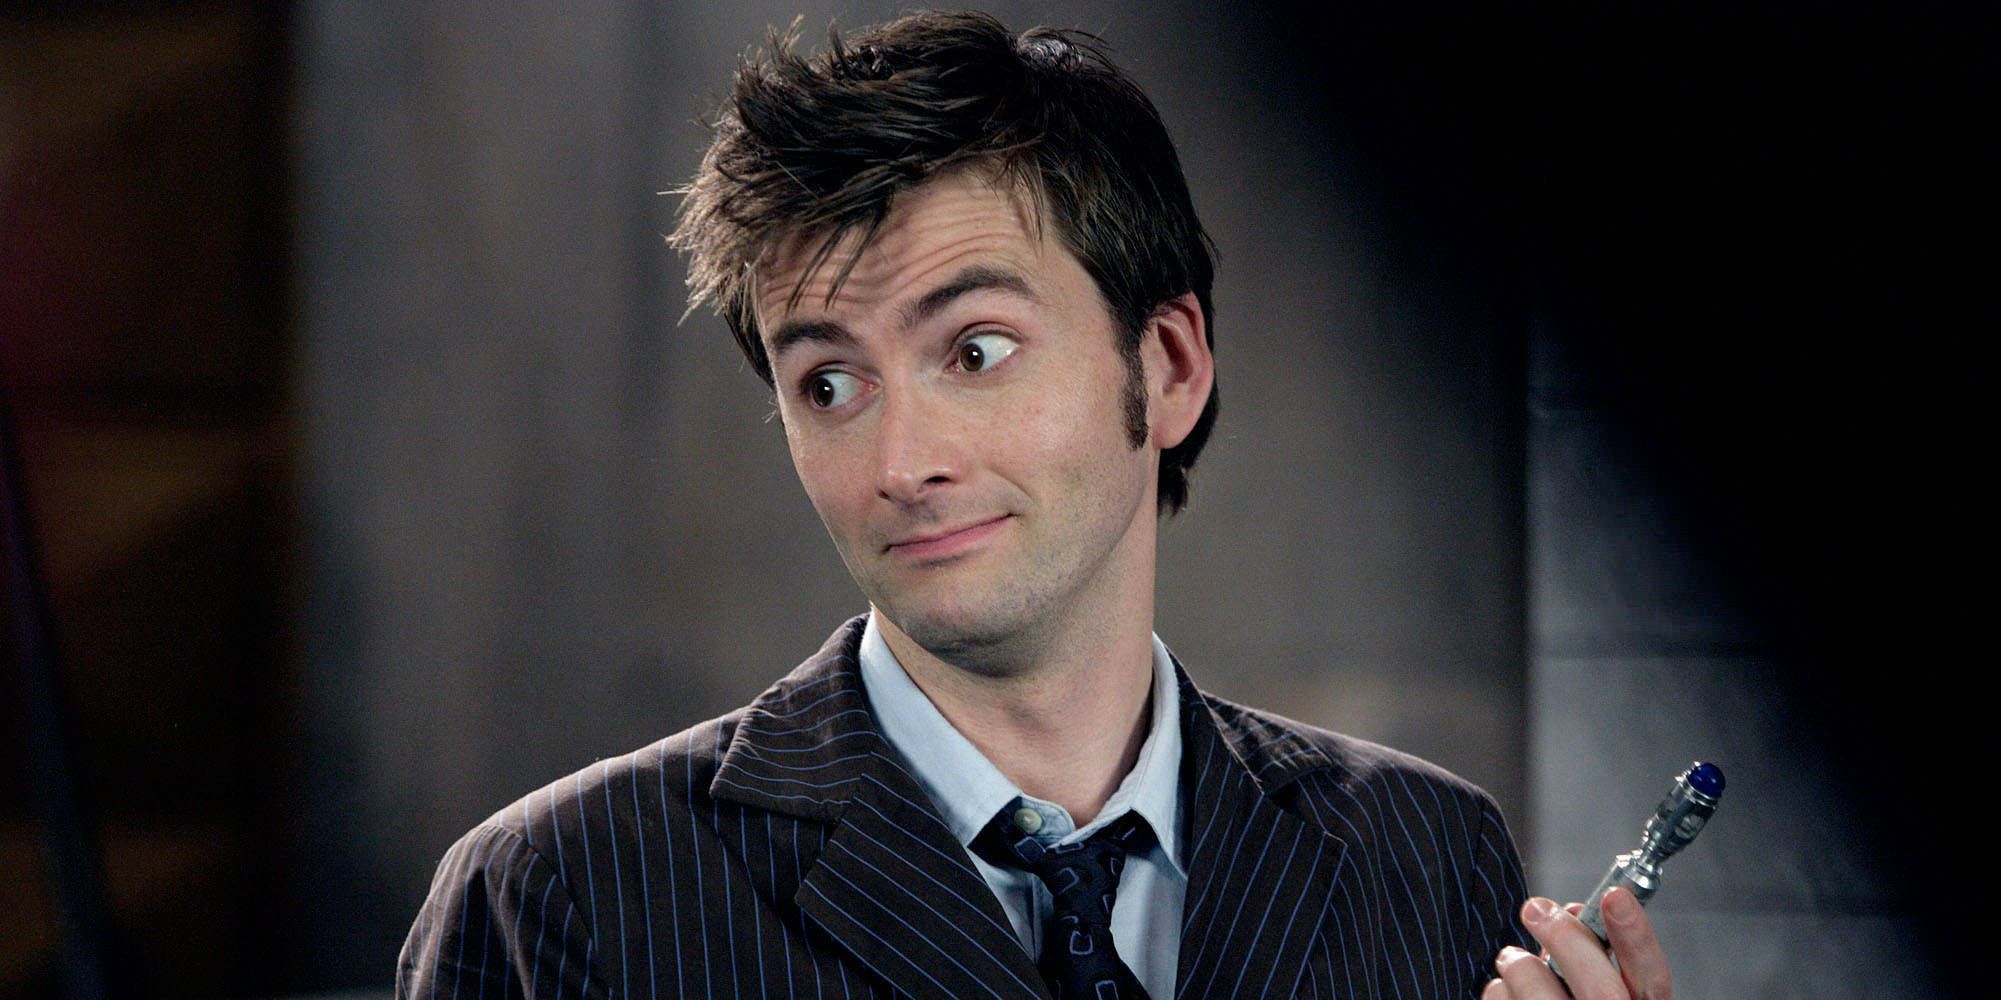 David Tennant as Tenth Doctor in Doctor Who